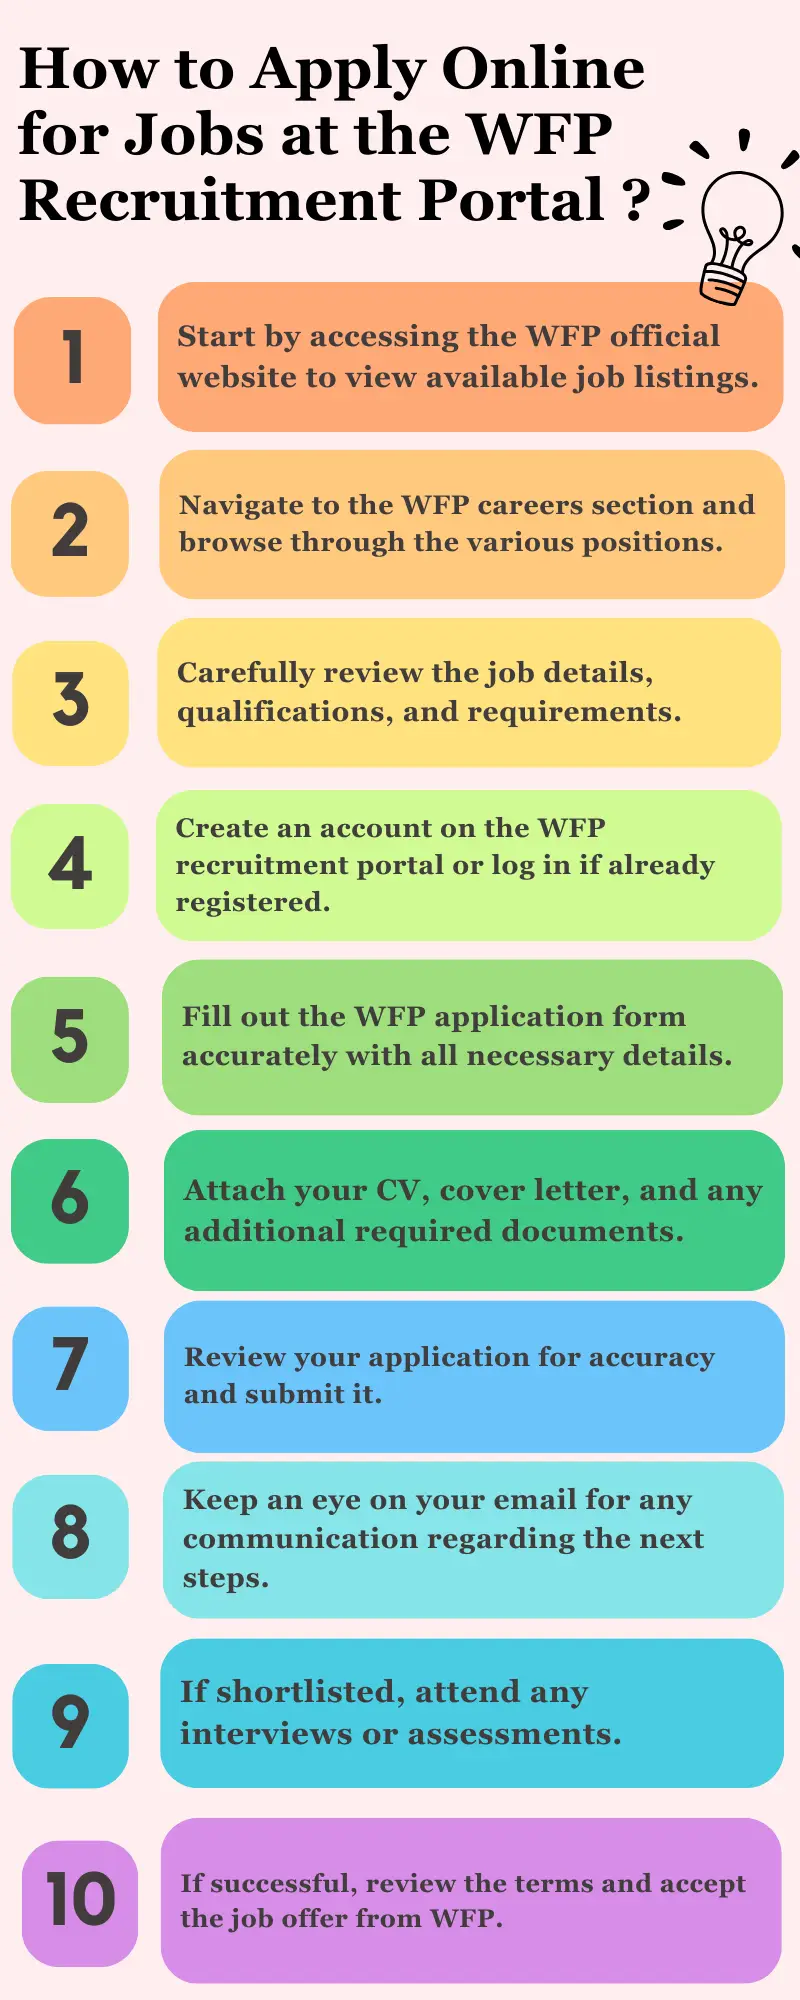 How to Apply Online for Jobs at the WFP Recruitment Portal ?